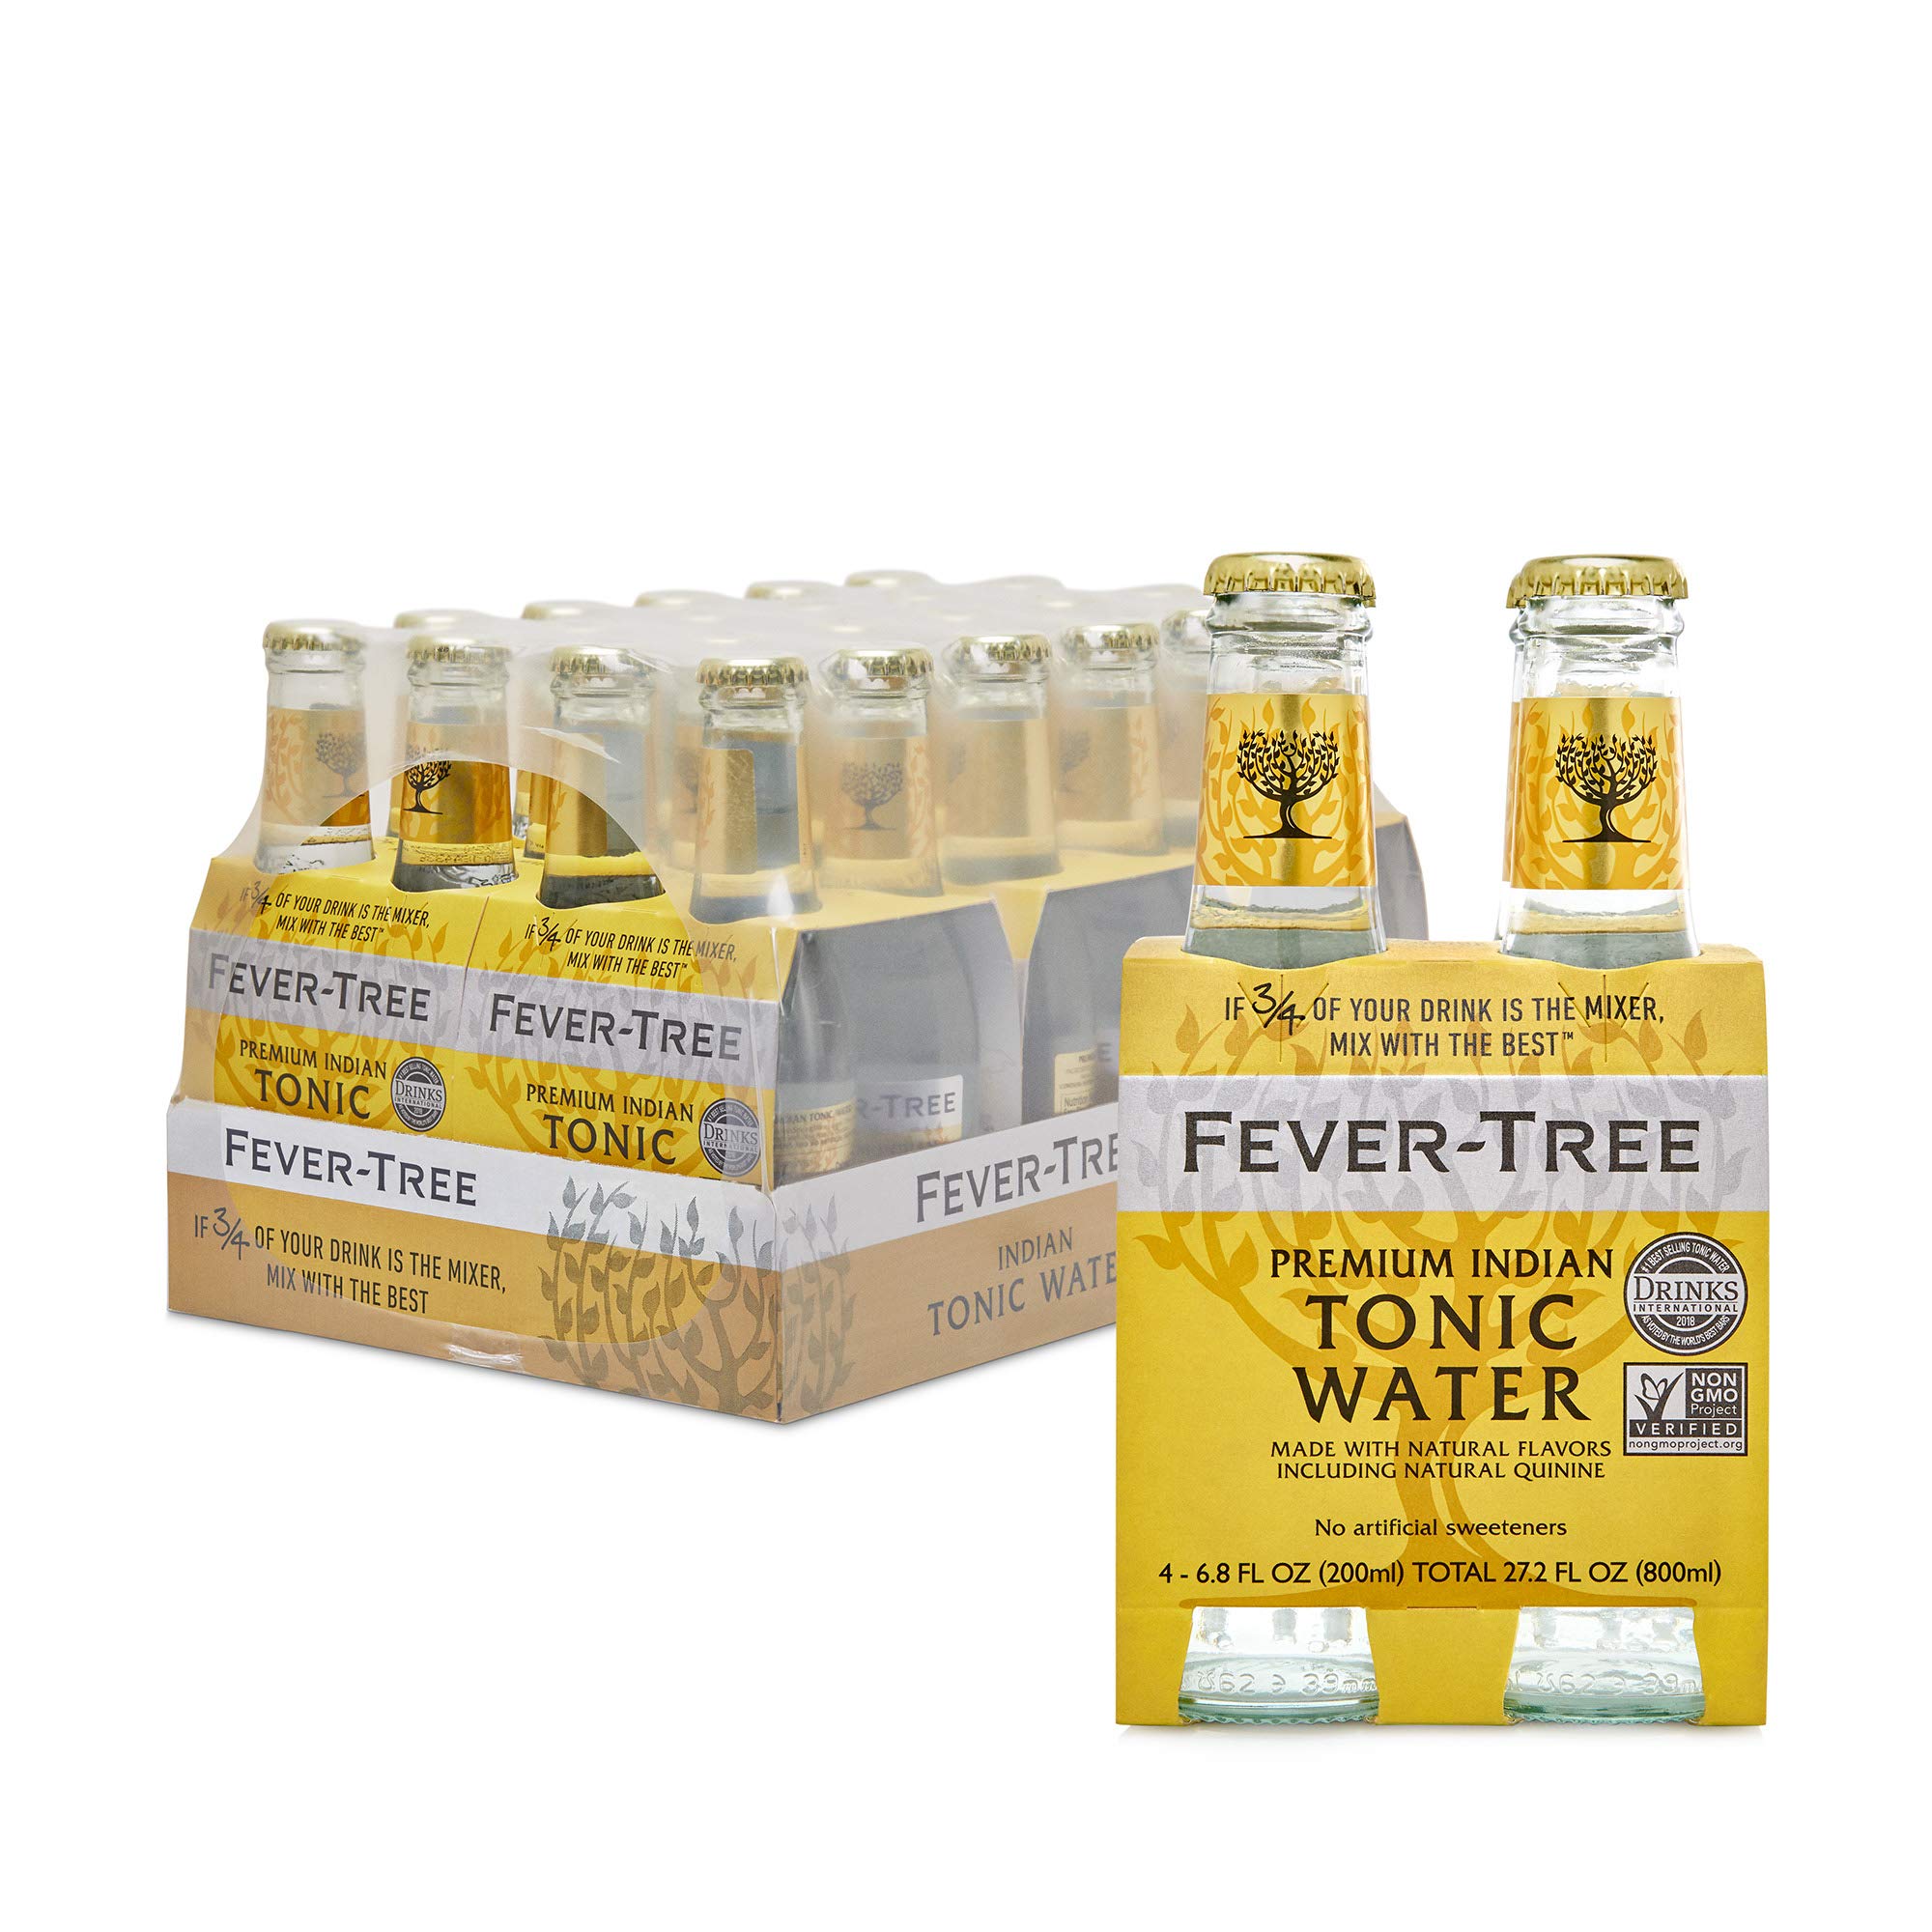 Fever-Tree Premium Tonic Water, Indian, 163.2 Fl Oz (Pack of 24)